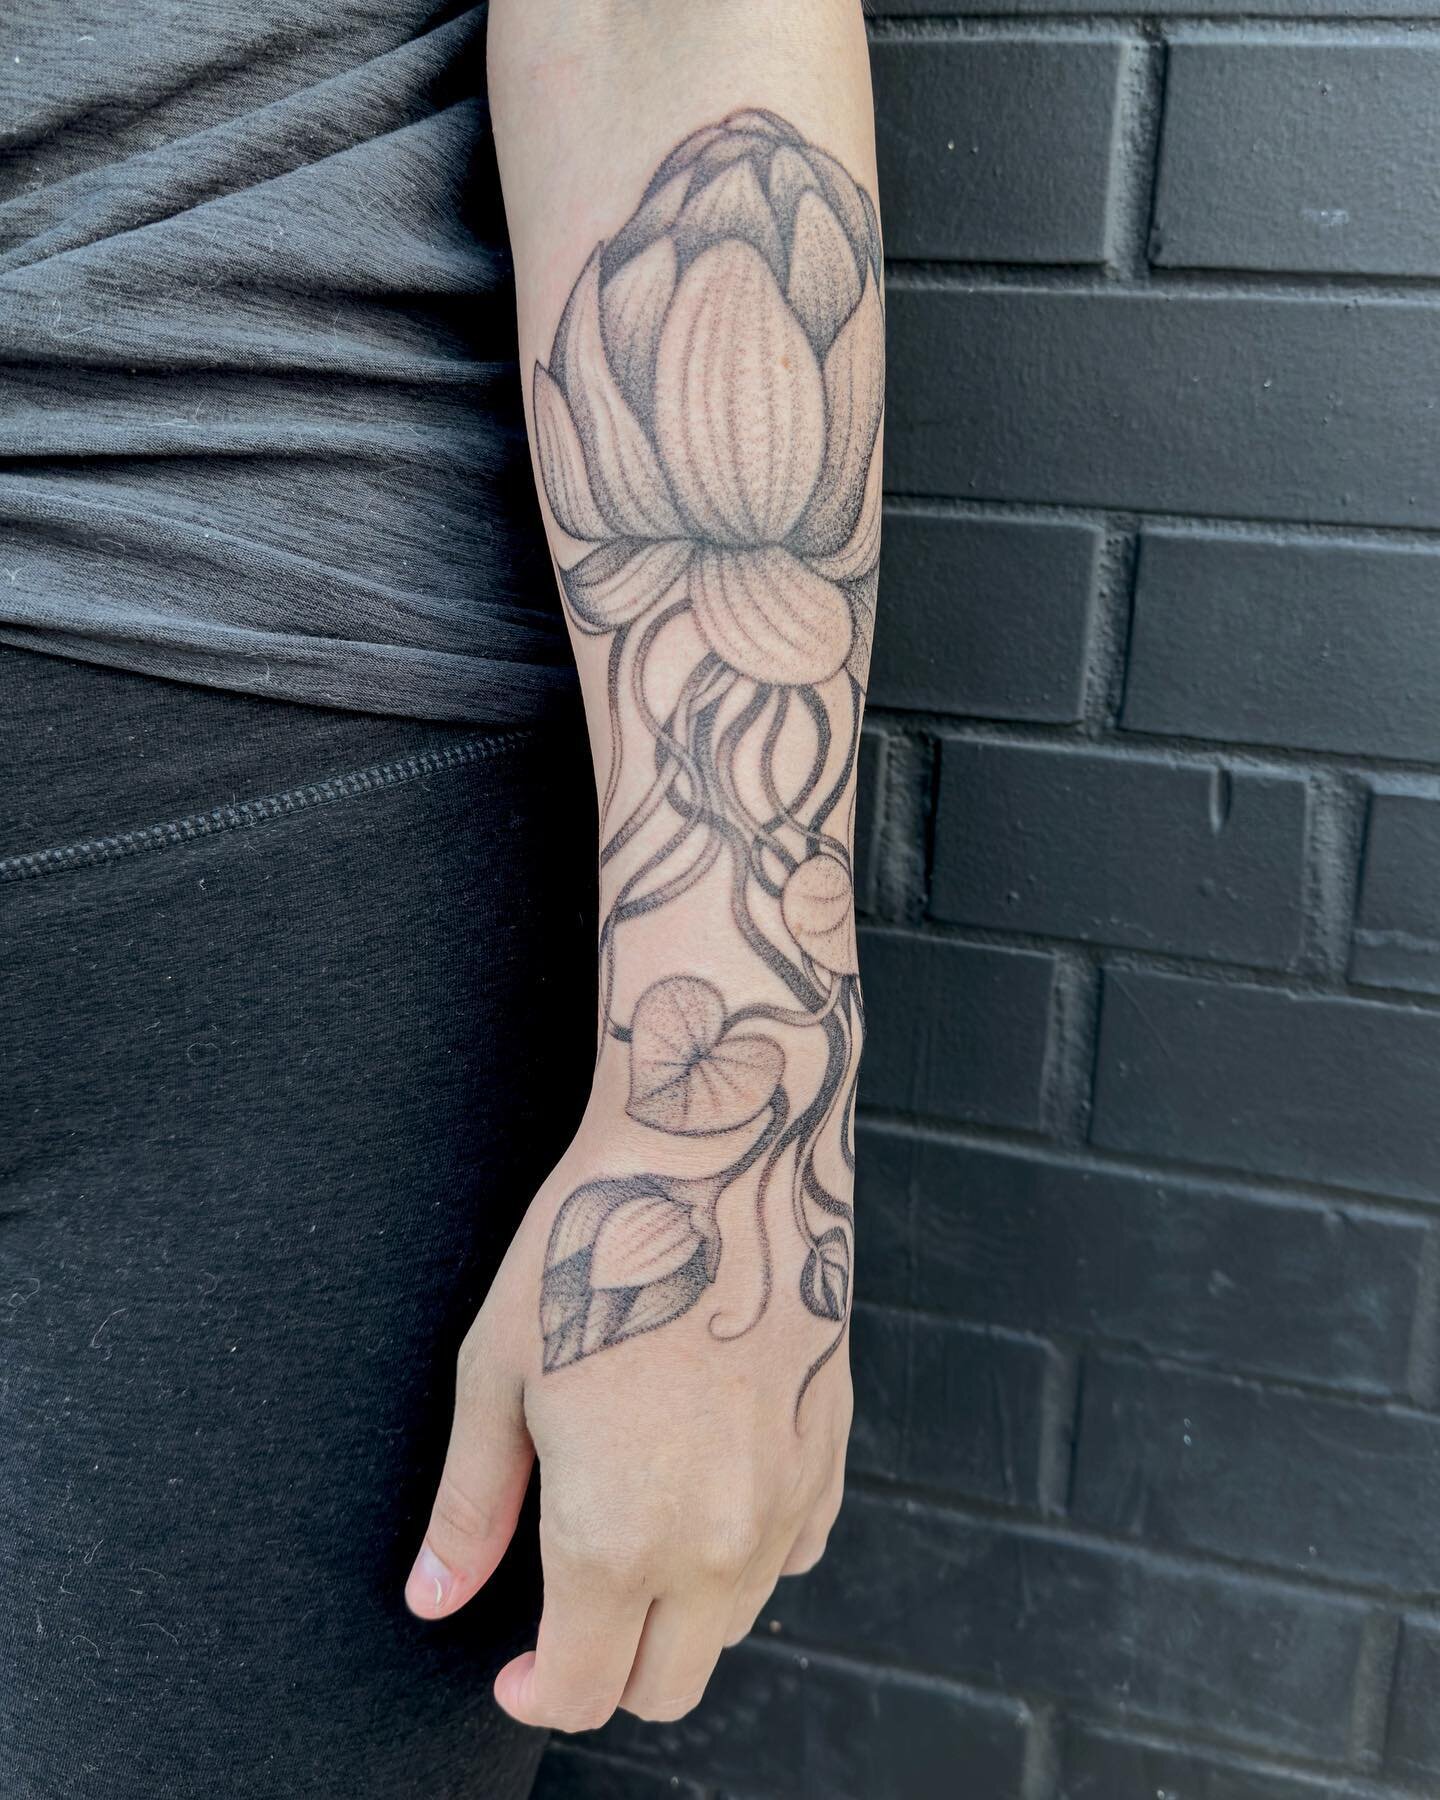 Freehand lotus tattoo for C. Thanks for sitting so great! 🌸 &ldquo;i have been on a journey of individuation and fulfillment since birth. last week these words came to me, and i crave a visual representation in my physical every day life. 

&quot;my